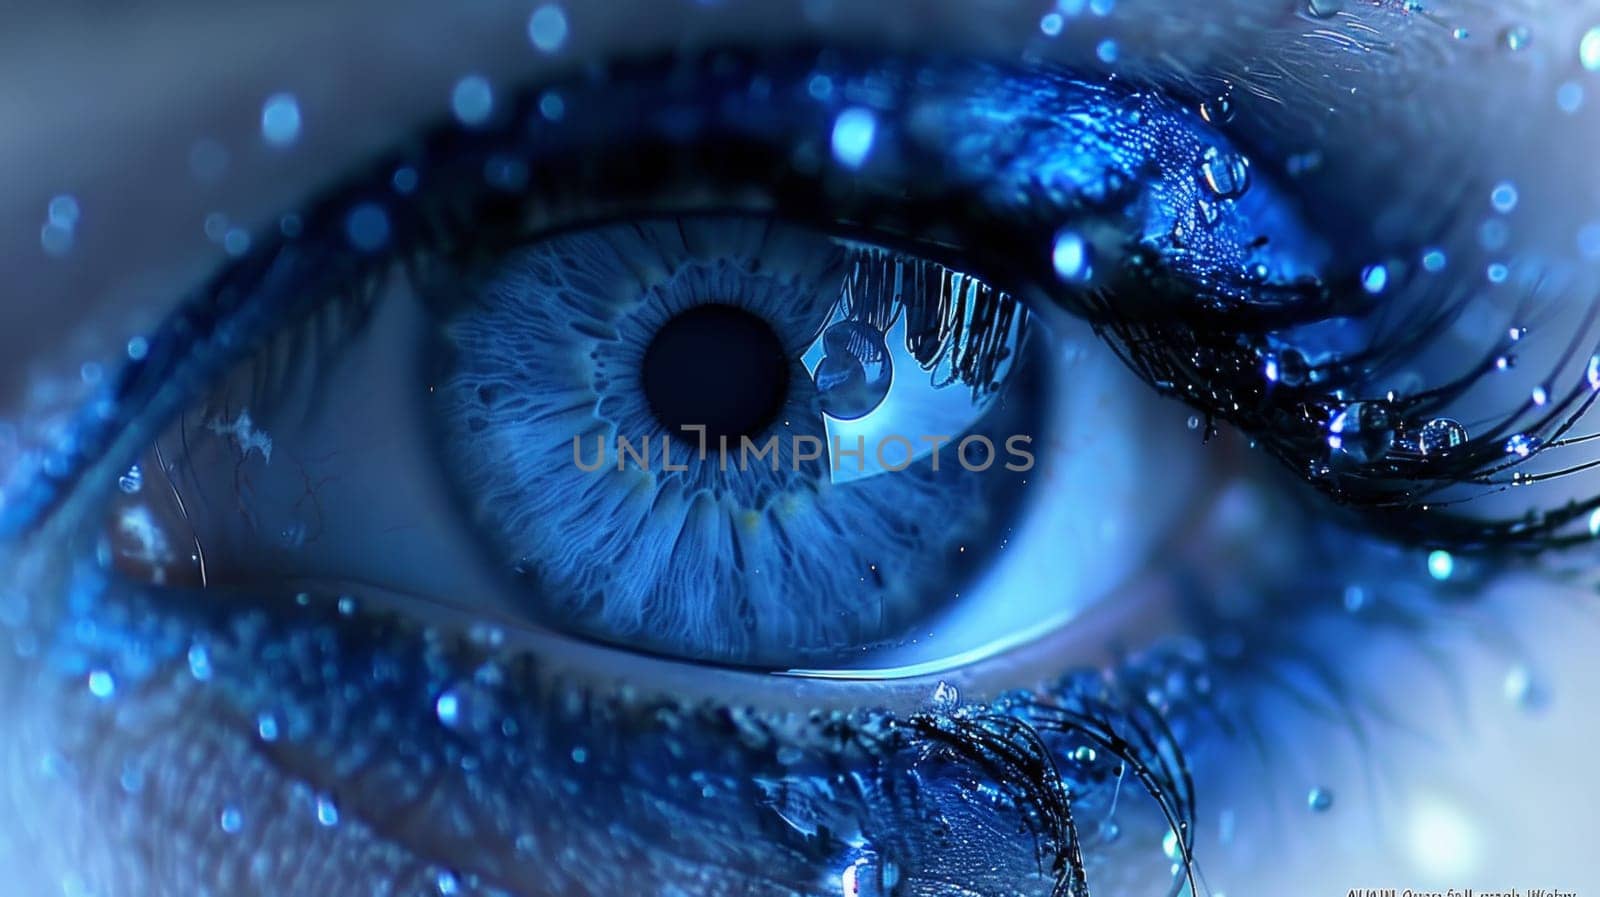 A close up of a blue eye with water droplets on it, AI by starush